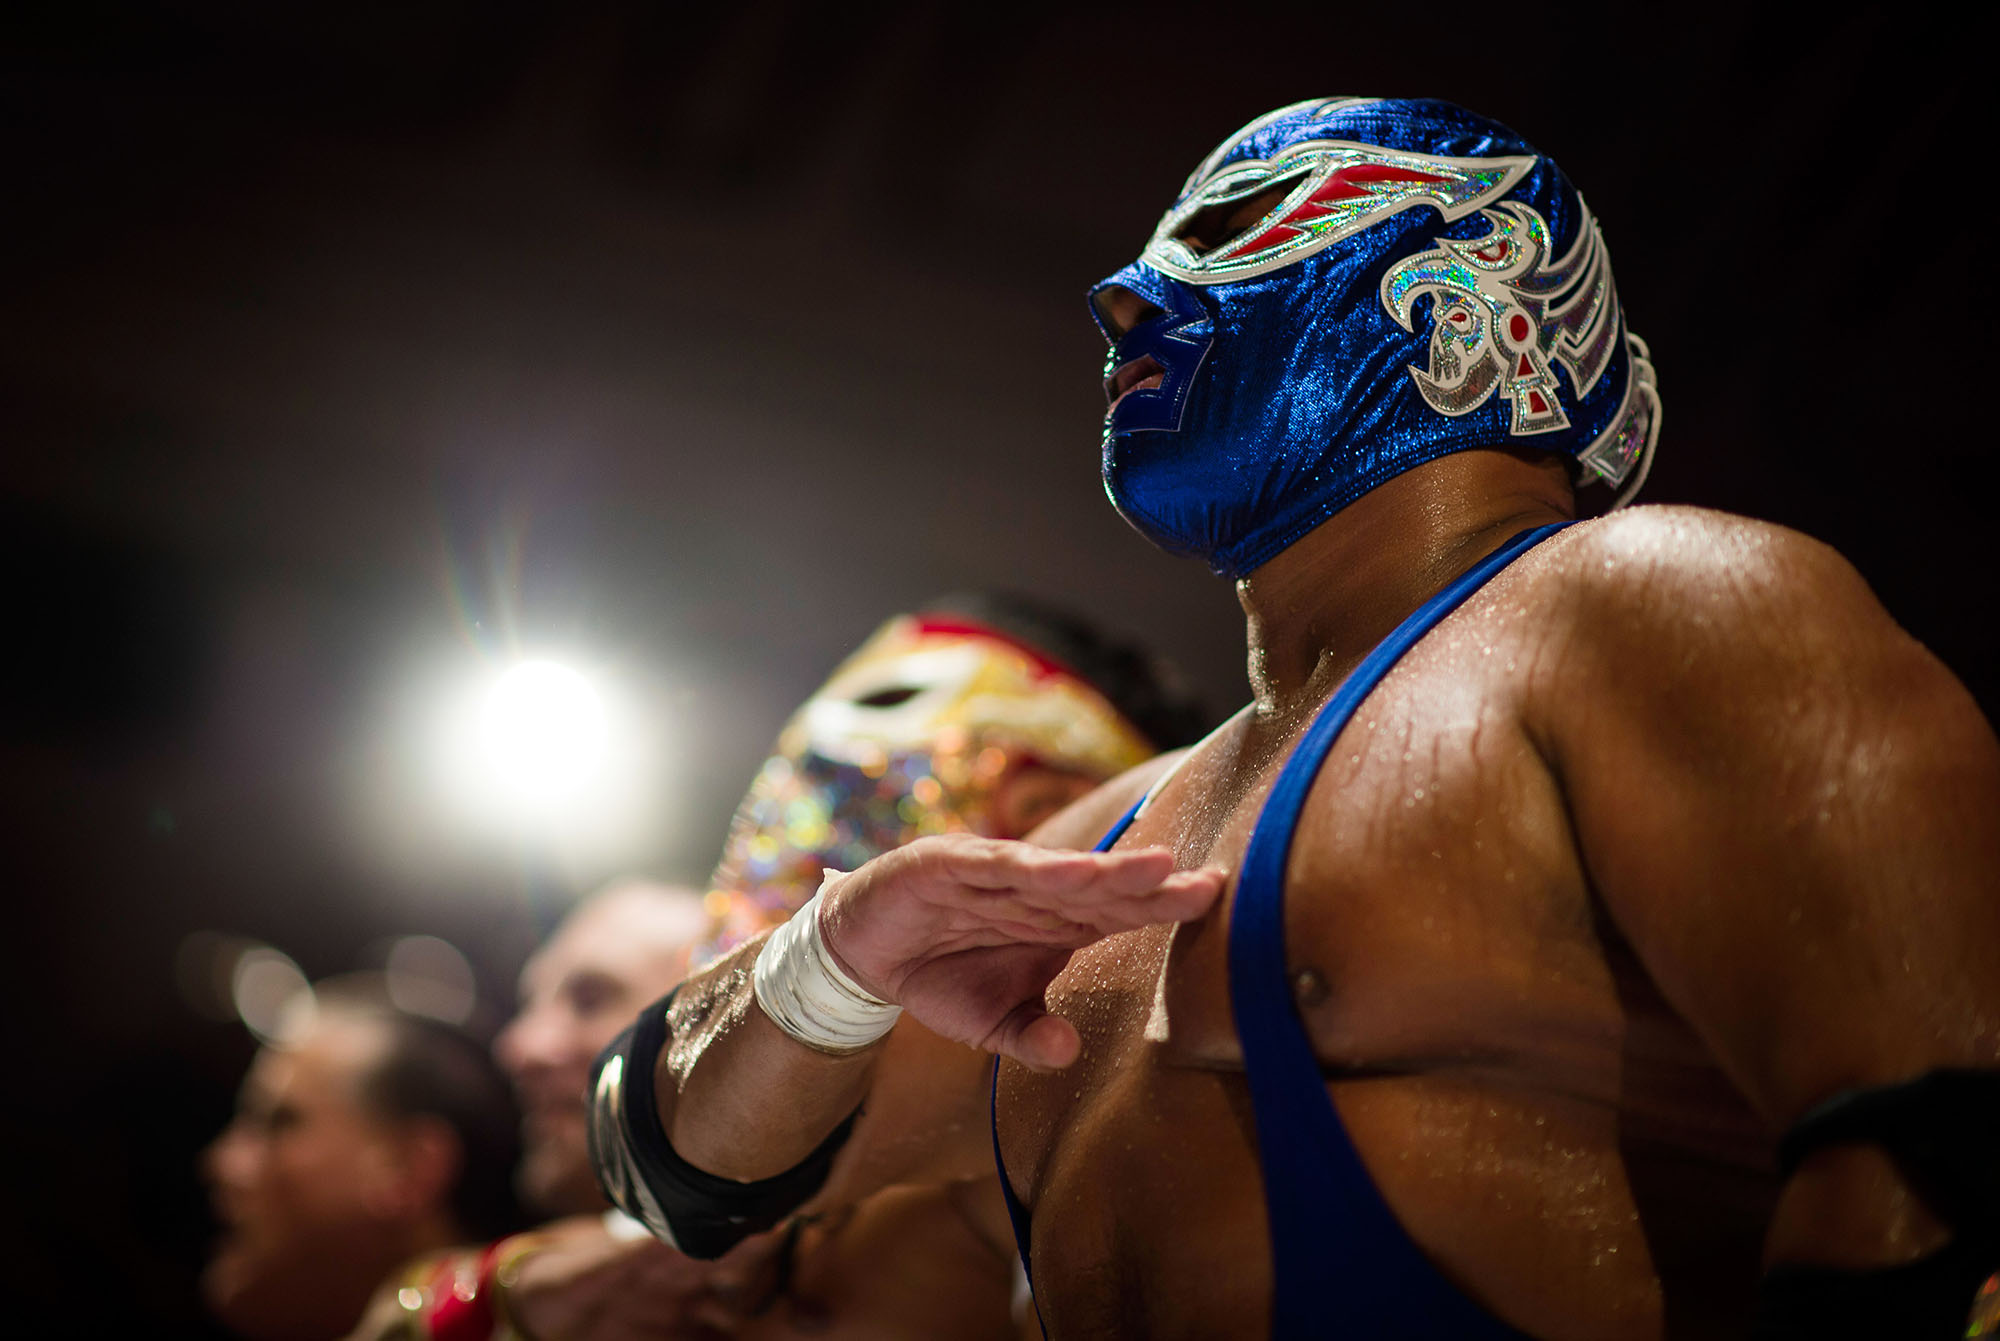 Lucha Libre: The Culture Of A** Kicking